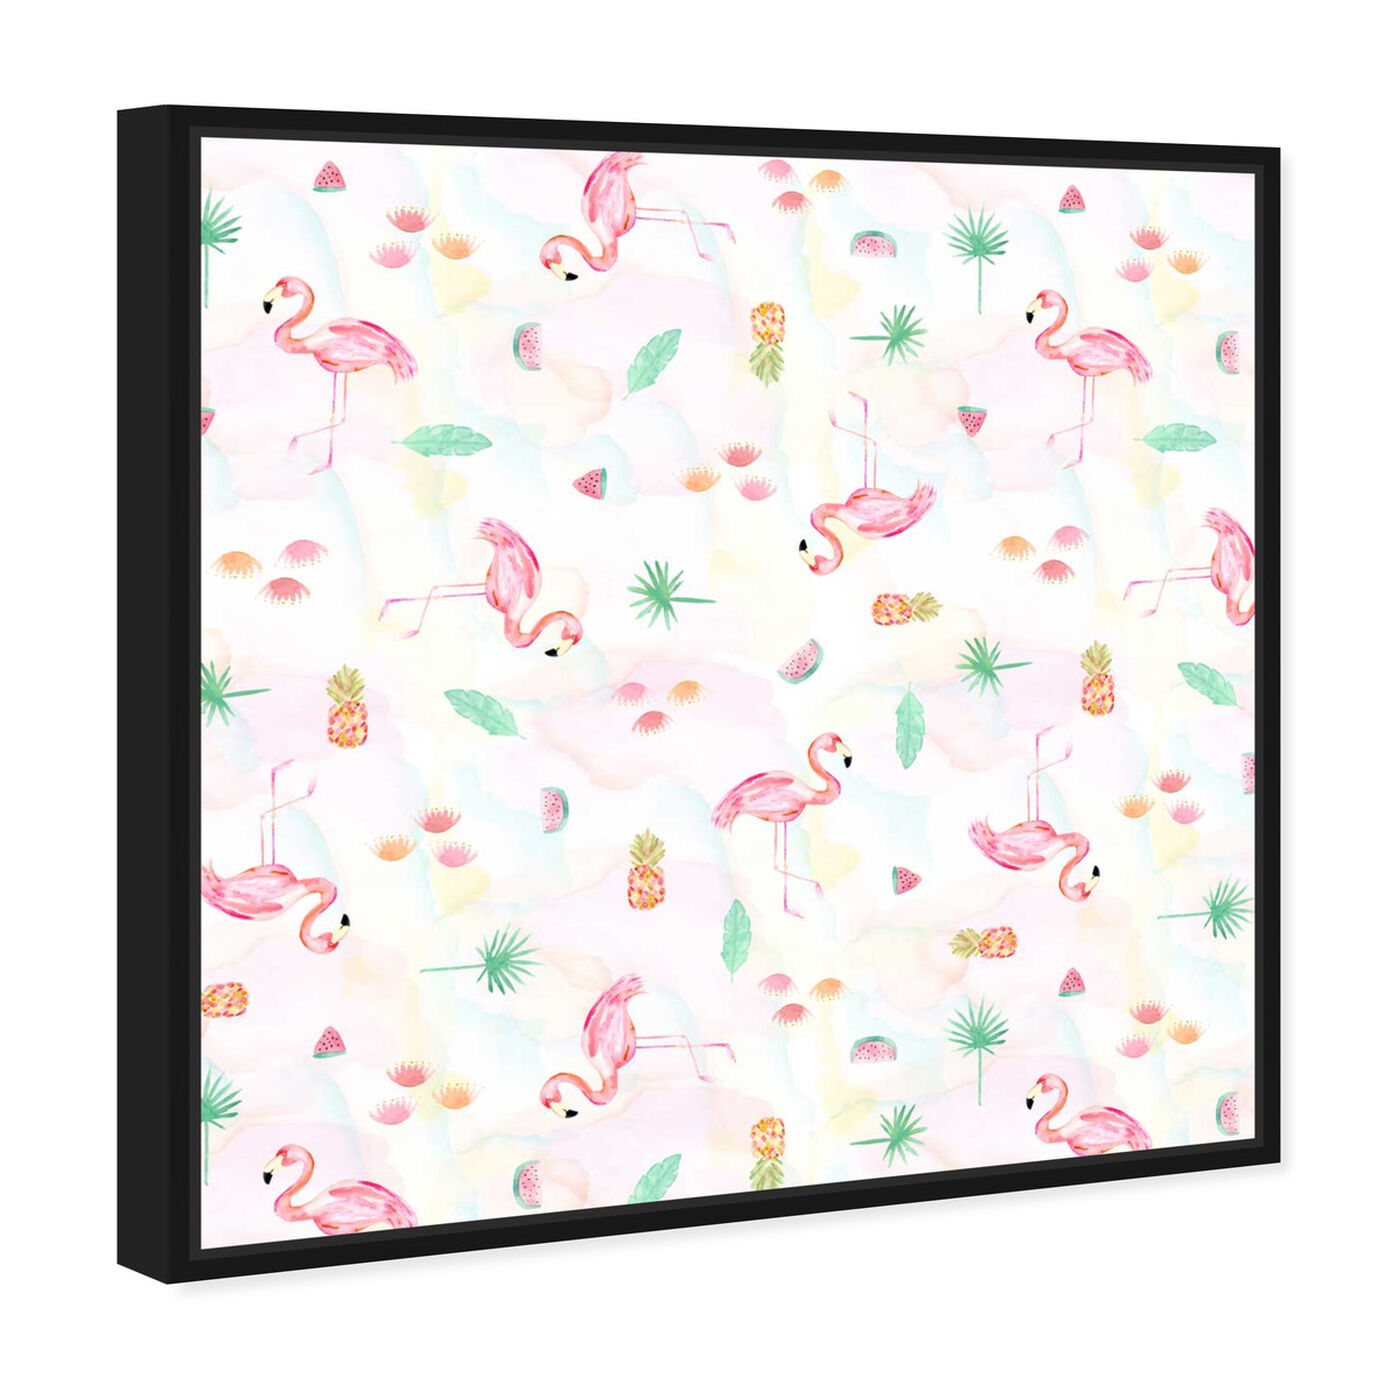 Angled view of Flamingo Watercolors featuring animals and birds art.